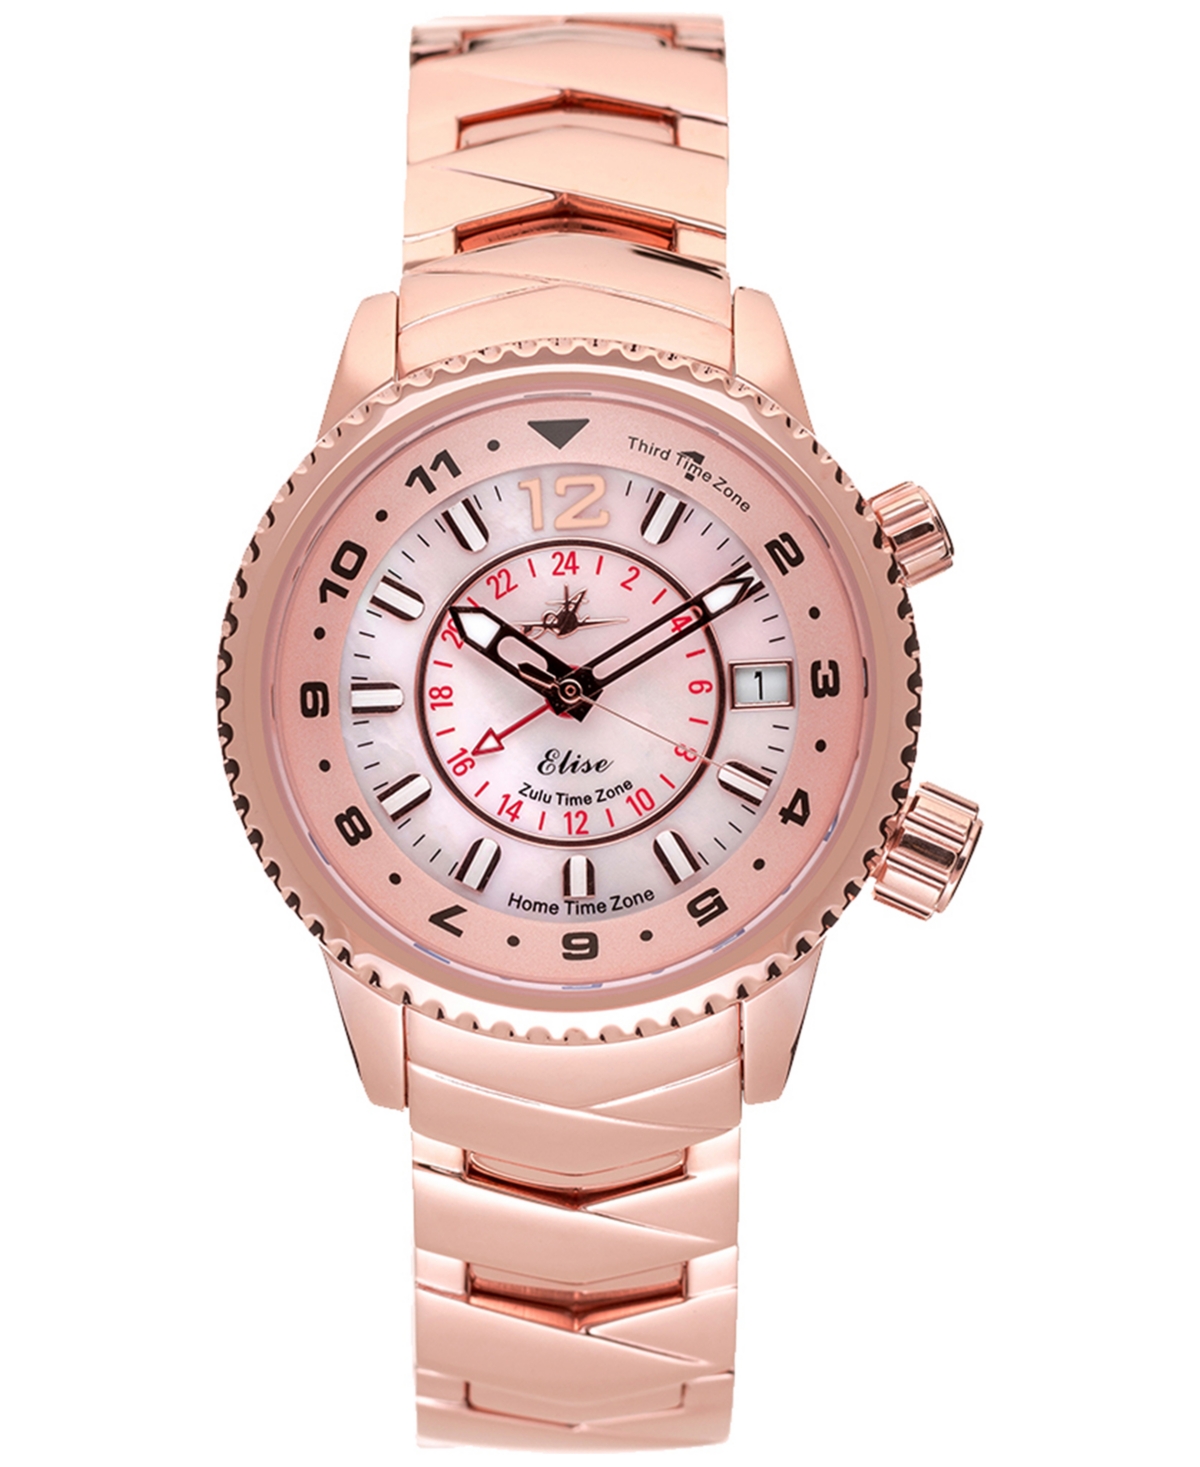 Women's Elise Swiss Tri-Time Rose Gold-Tone Ion-Plated Stainless Steel Bracelet Watch 33mm - Rose Gold